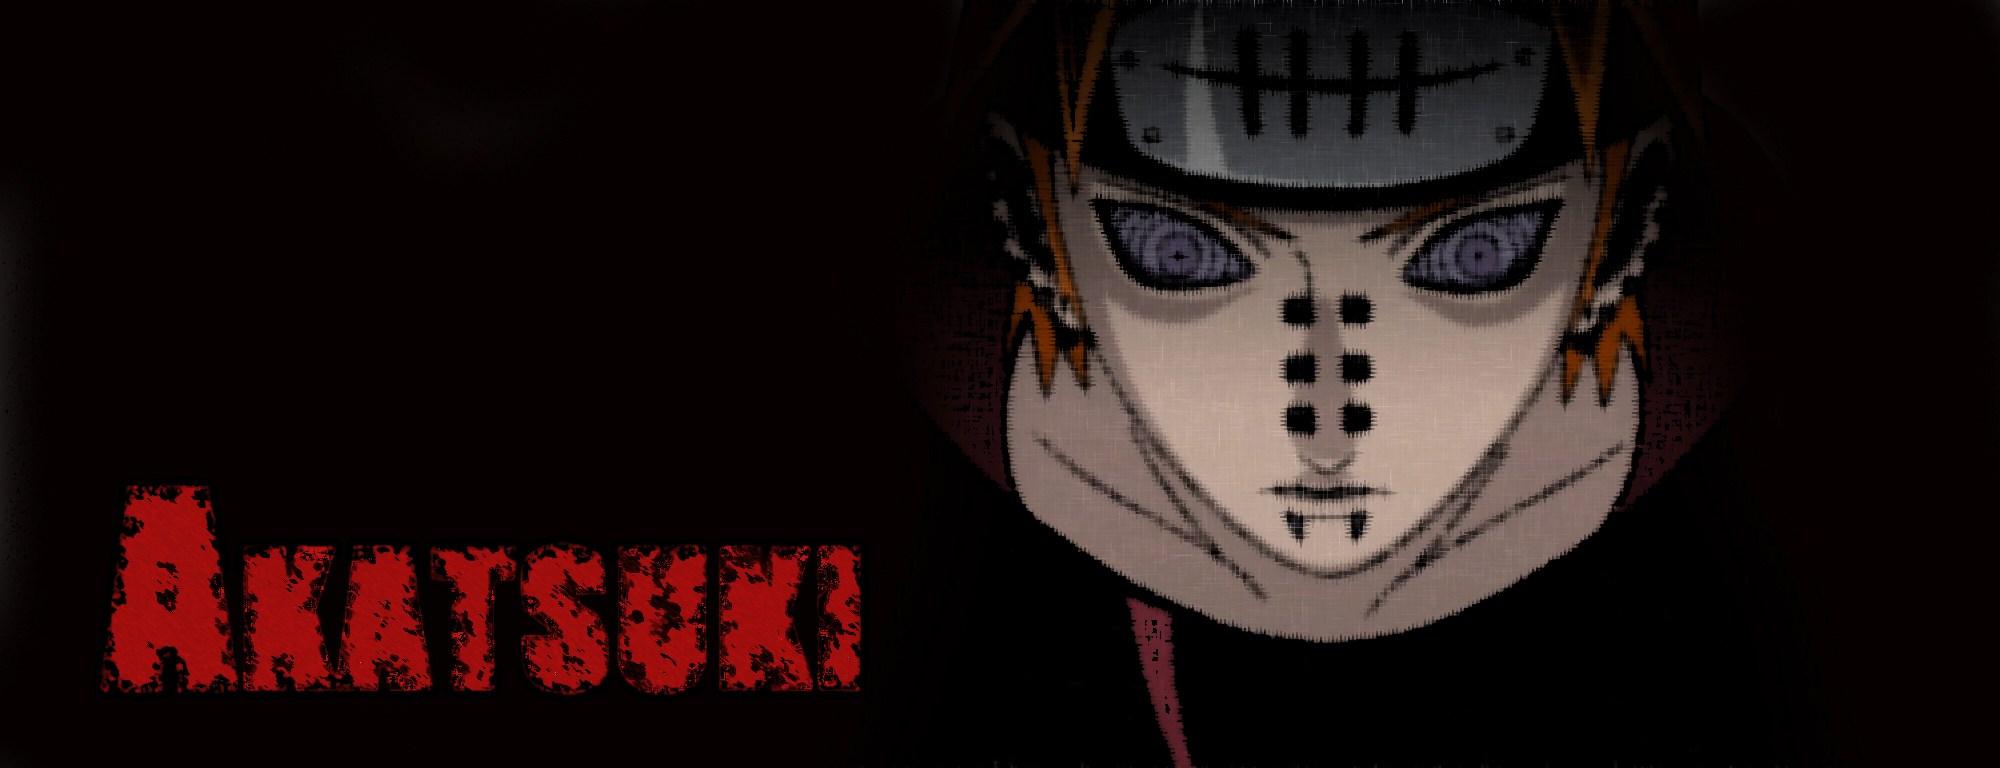 101 Pain (Naruto) HD Wallpapers | Backgrounds - Wallpaper Abyss